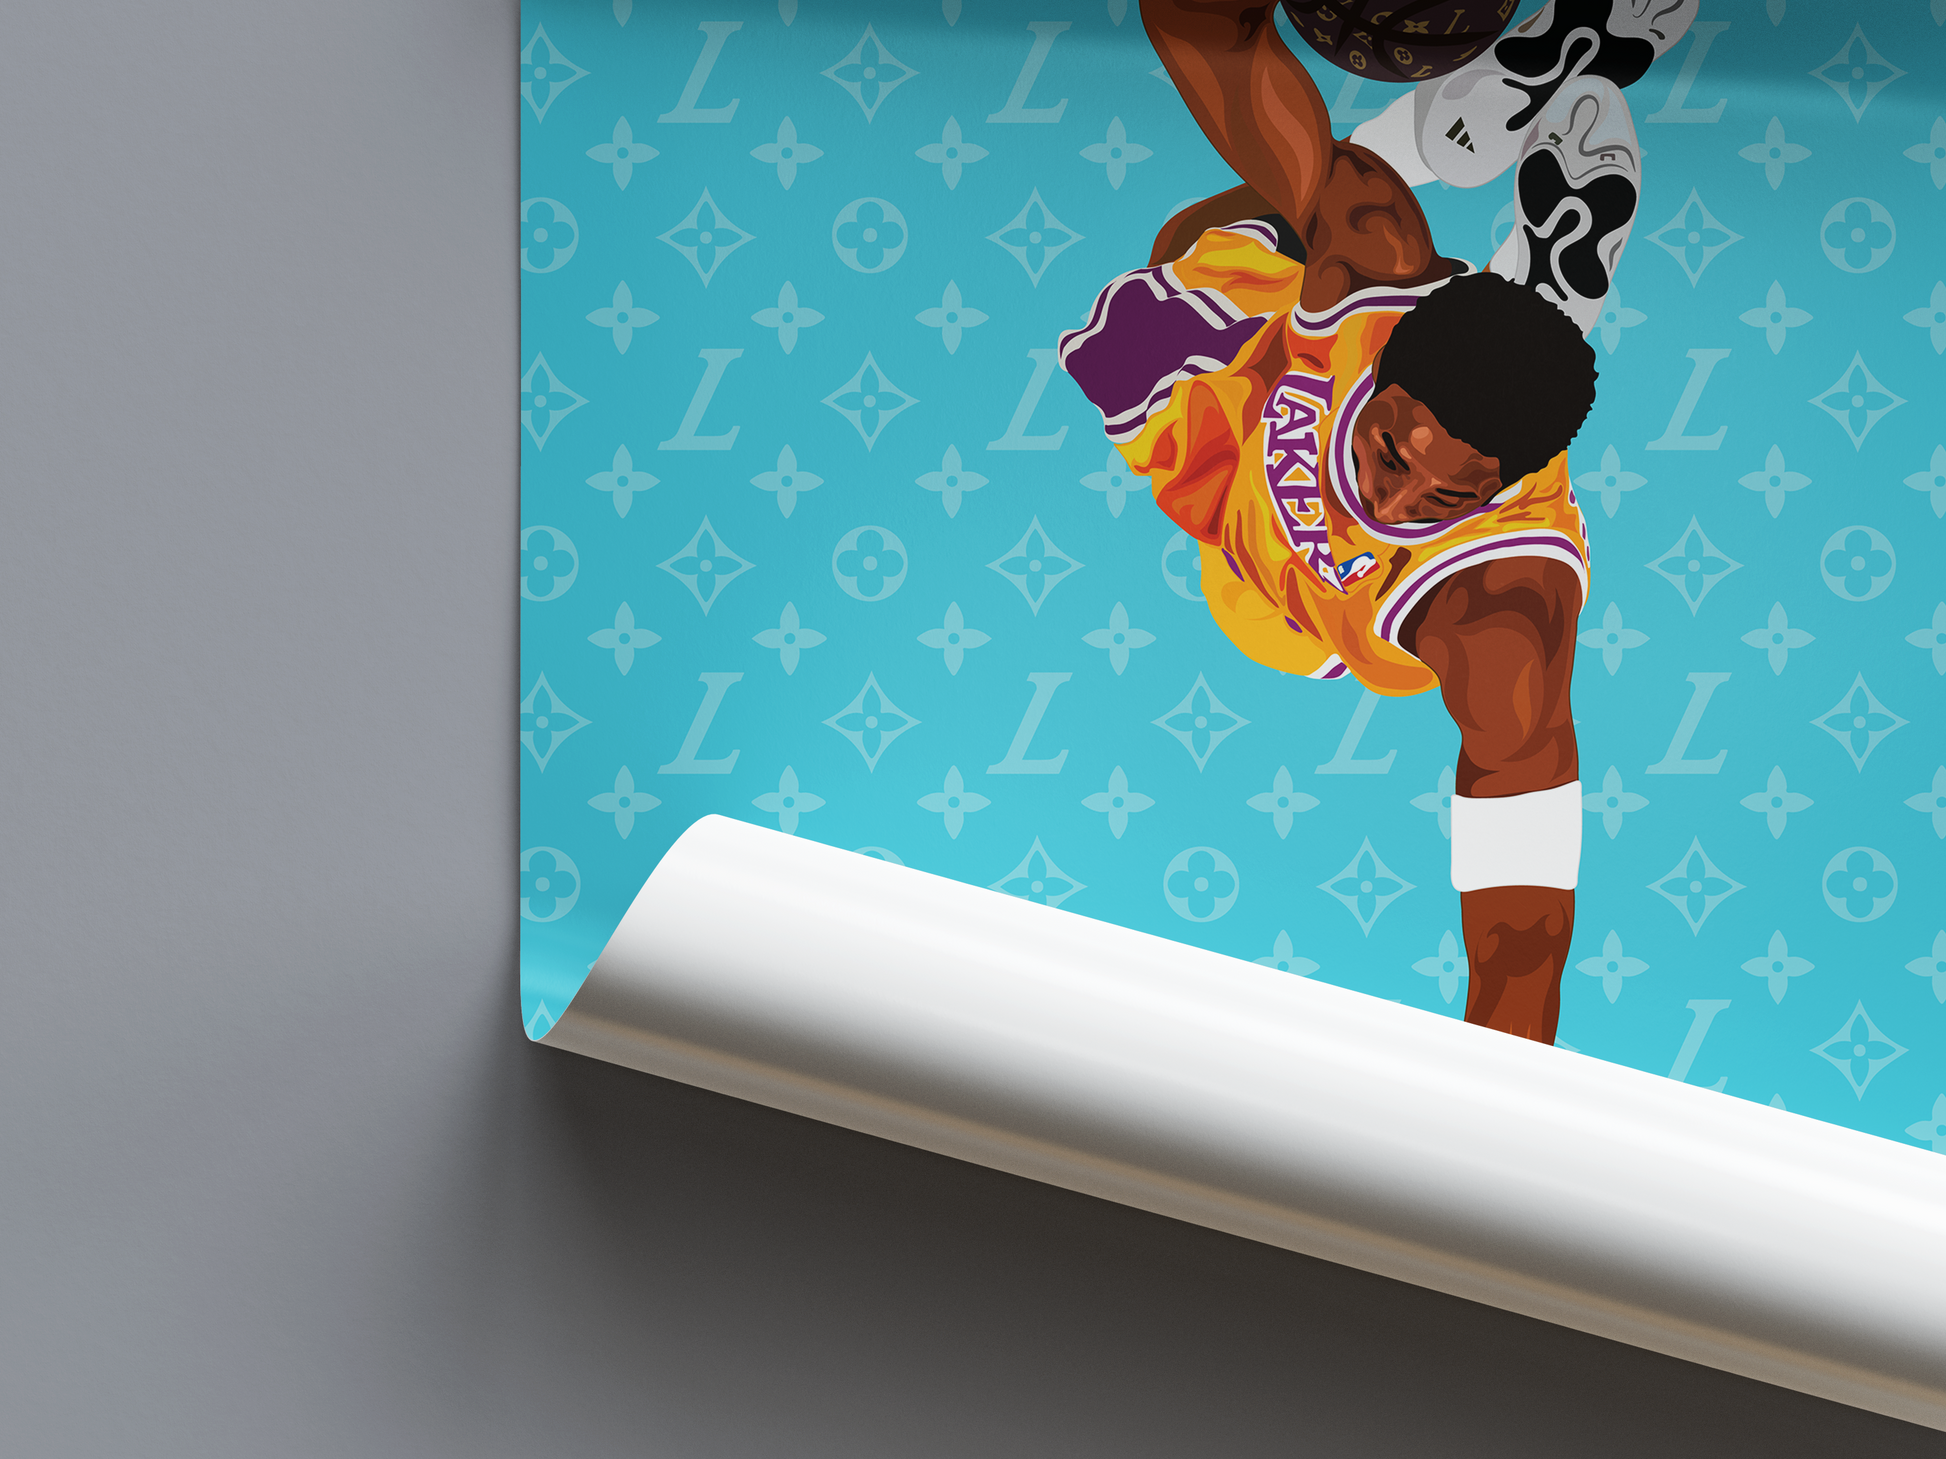 Premium & Sustainable Kobe Bryant Lakers Louis Vuitton Poster Print. Hand crafted in the UK from the highest quality paper, created with sustainable FSC paper. Texturised inks, brings the poster to life. Available to purchase with a Polcore Recycled Plastic Frame with Perspex screening to let your print do the talking.